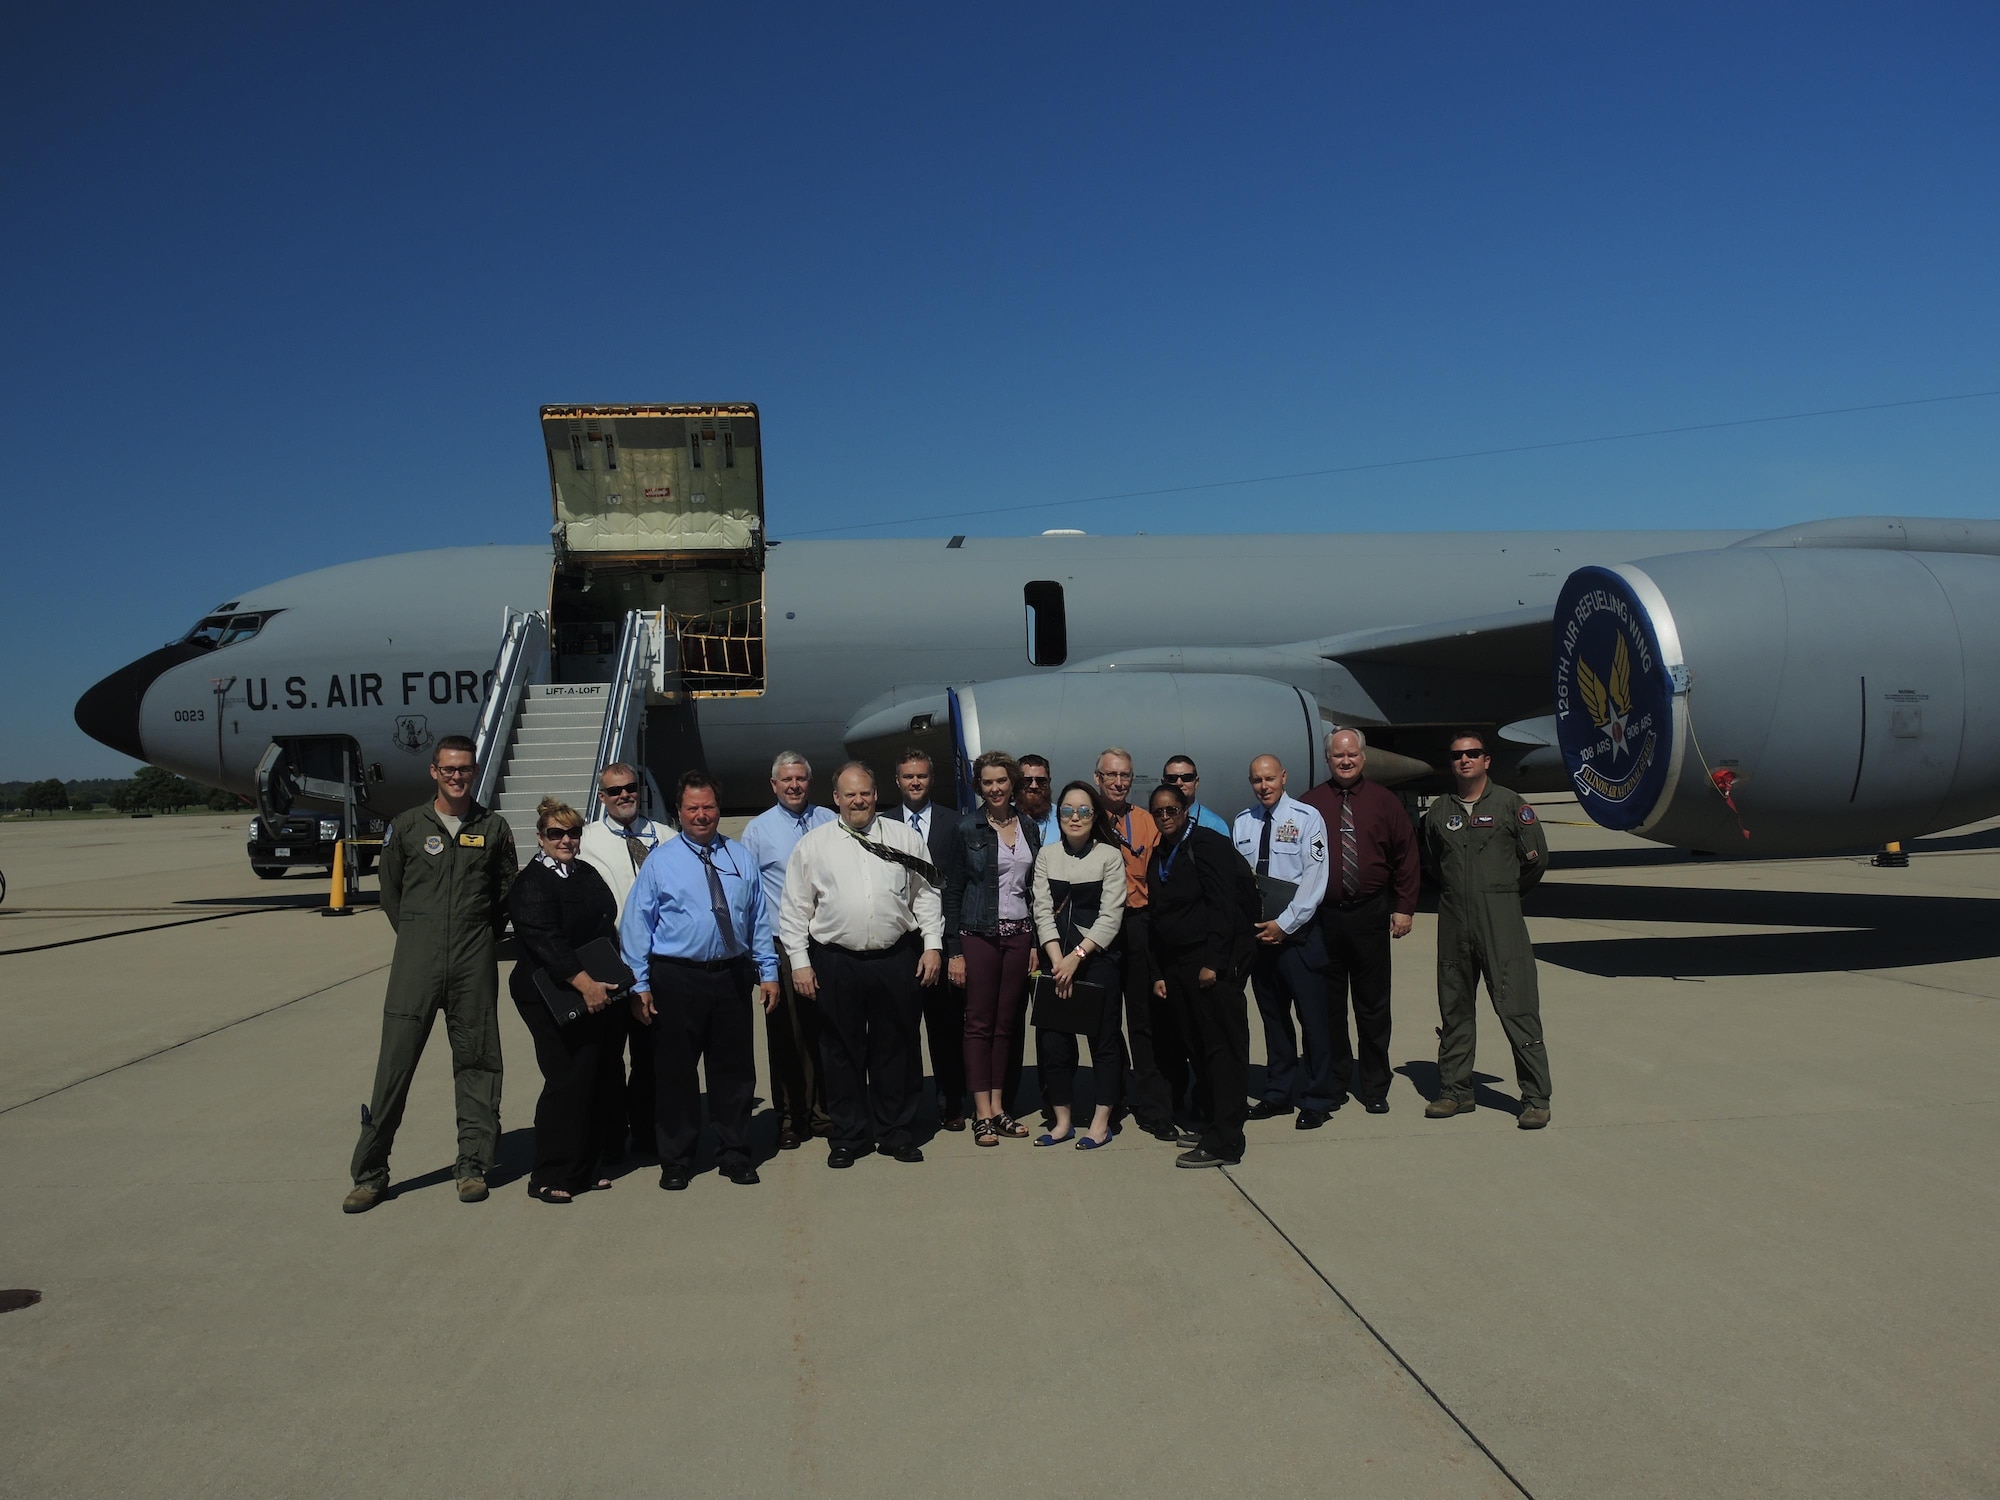 Civilian Leadership Development Program participants and members from the 126th Air Refueling Wing pose for a photo during the CLDP tour at Scott Air Force Base, Illinois. Air Mobility Command’s Civilian Leadership Development Program is a year-long program in which participants are provided leadership training and orientations to various directorates within Headquarters AMC, various associate units and commercial partners. (U.S. Air Force photo)  